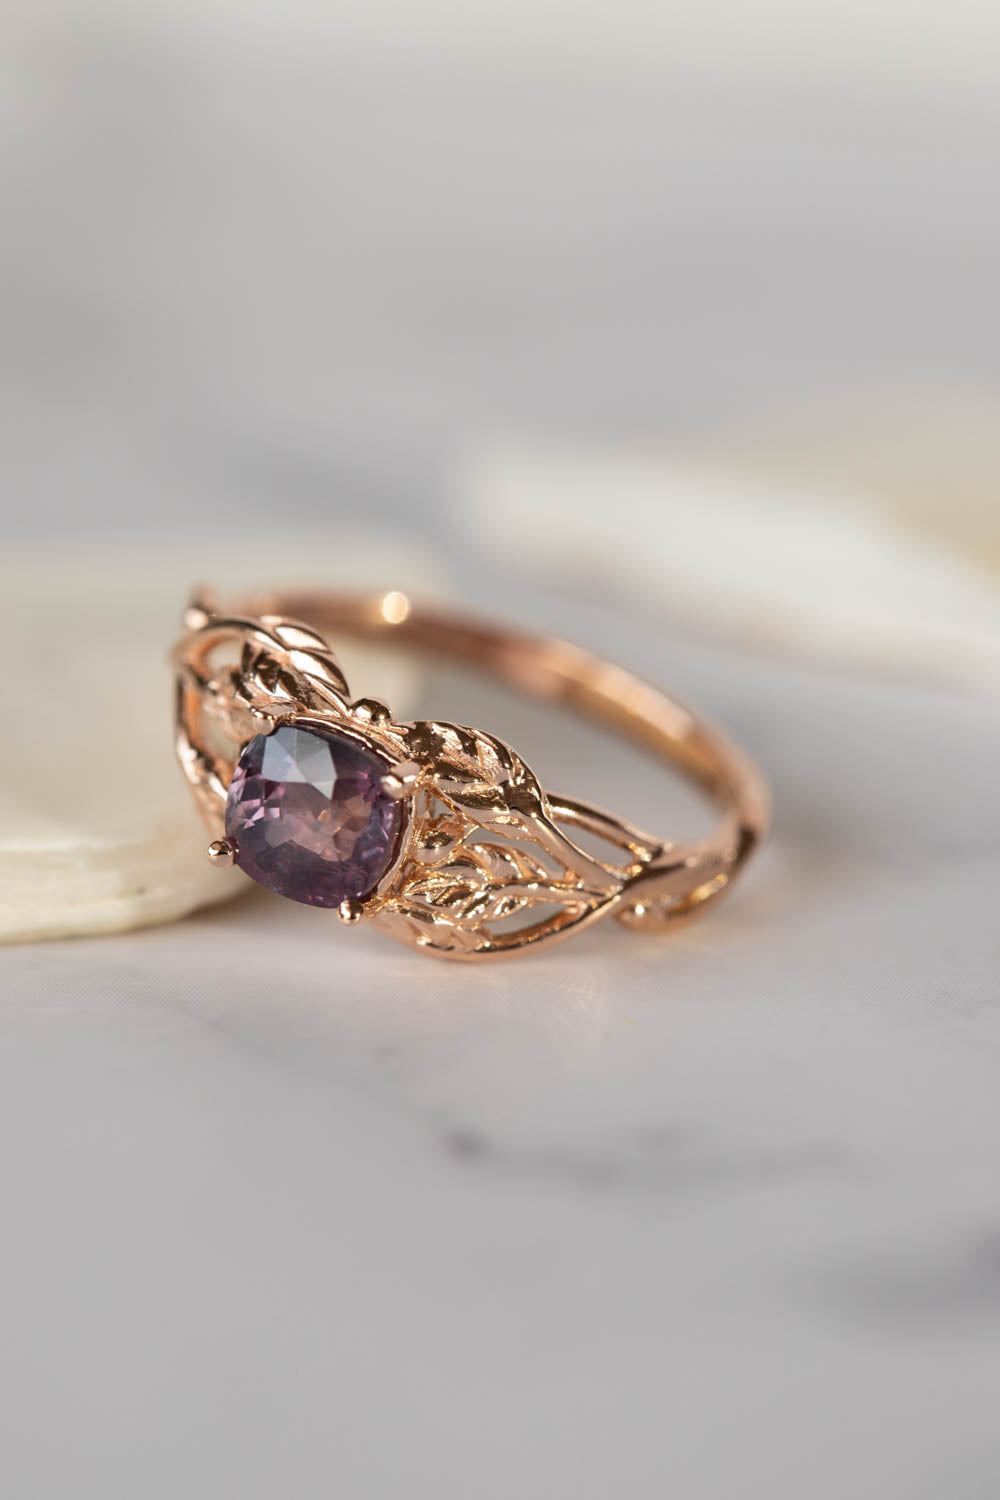 Cushion cut natural sapphire engagement ring, gold twig promise ring with sapphire / Tilia - Eden Garden Jewelry™